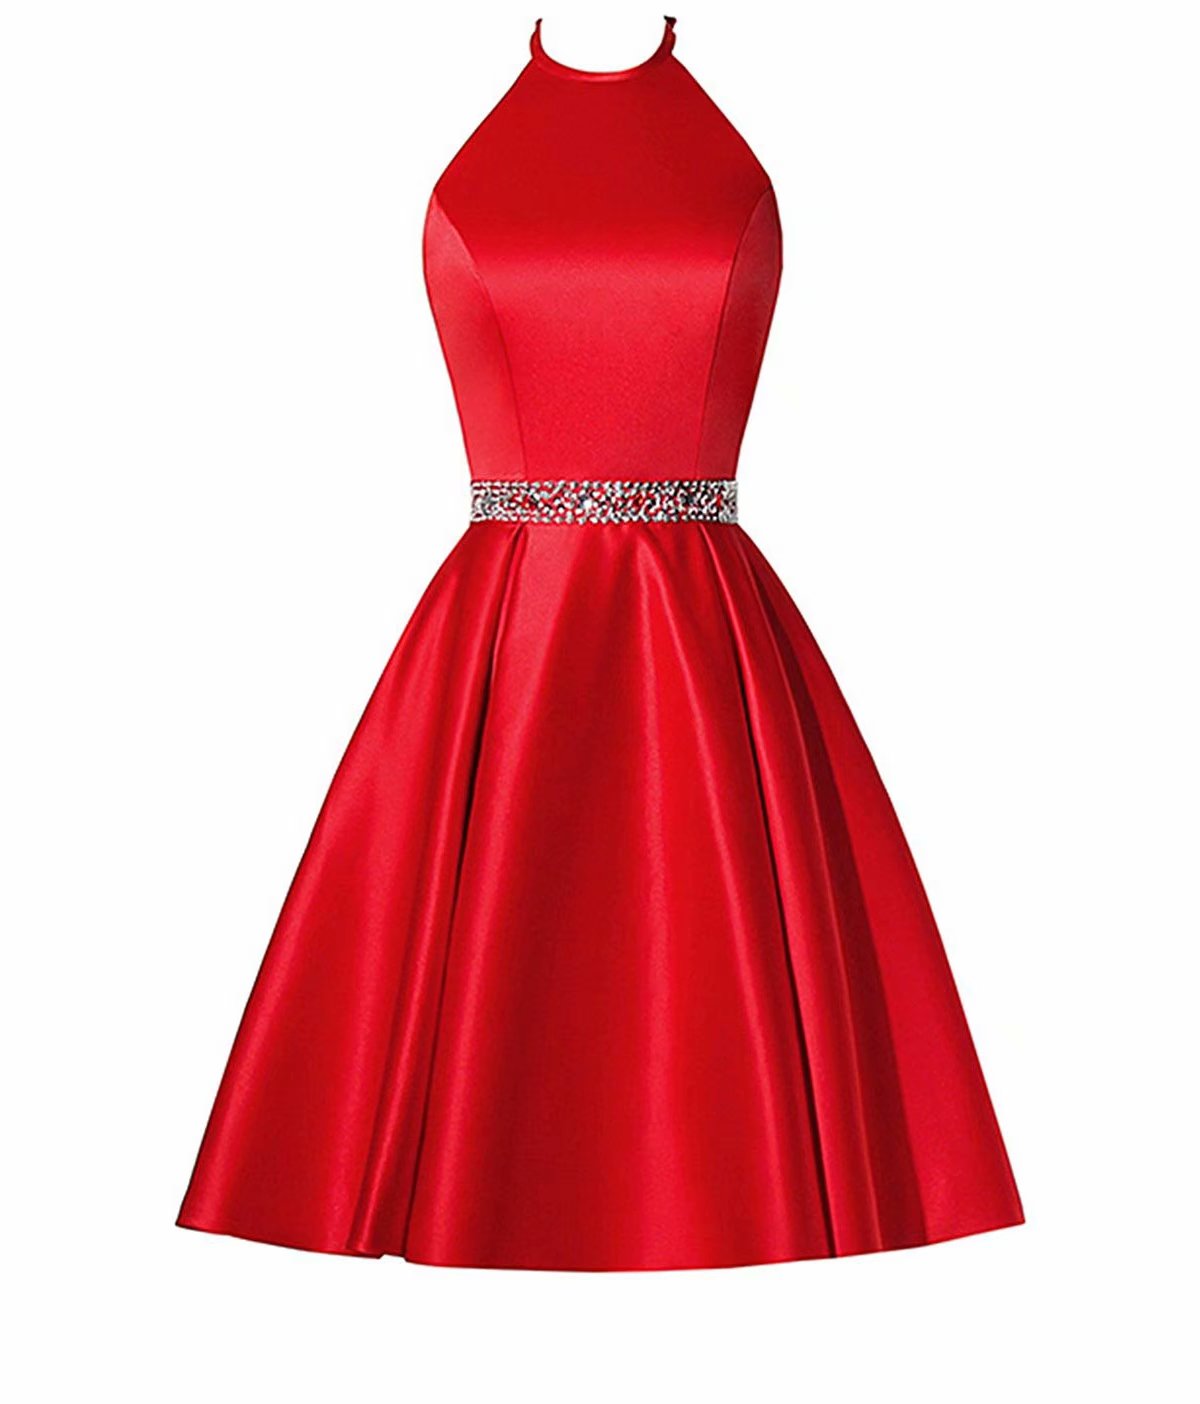 Fashion Red Short Homecoming Dress, Halter Neck Beading Evening Cocktail Gown, Bridesmaid Formal Dresses